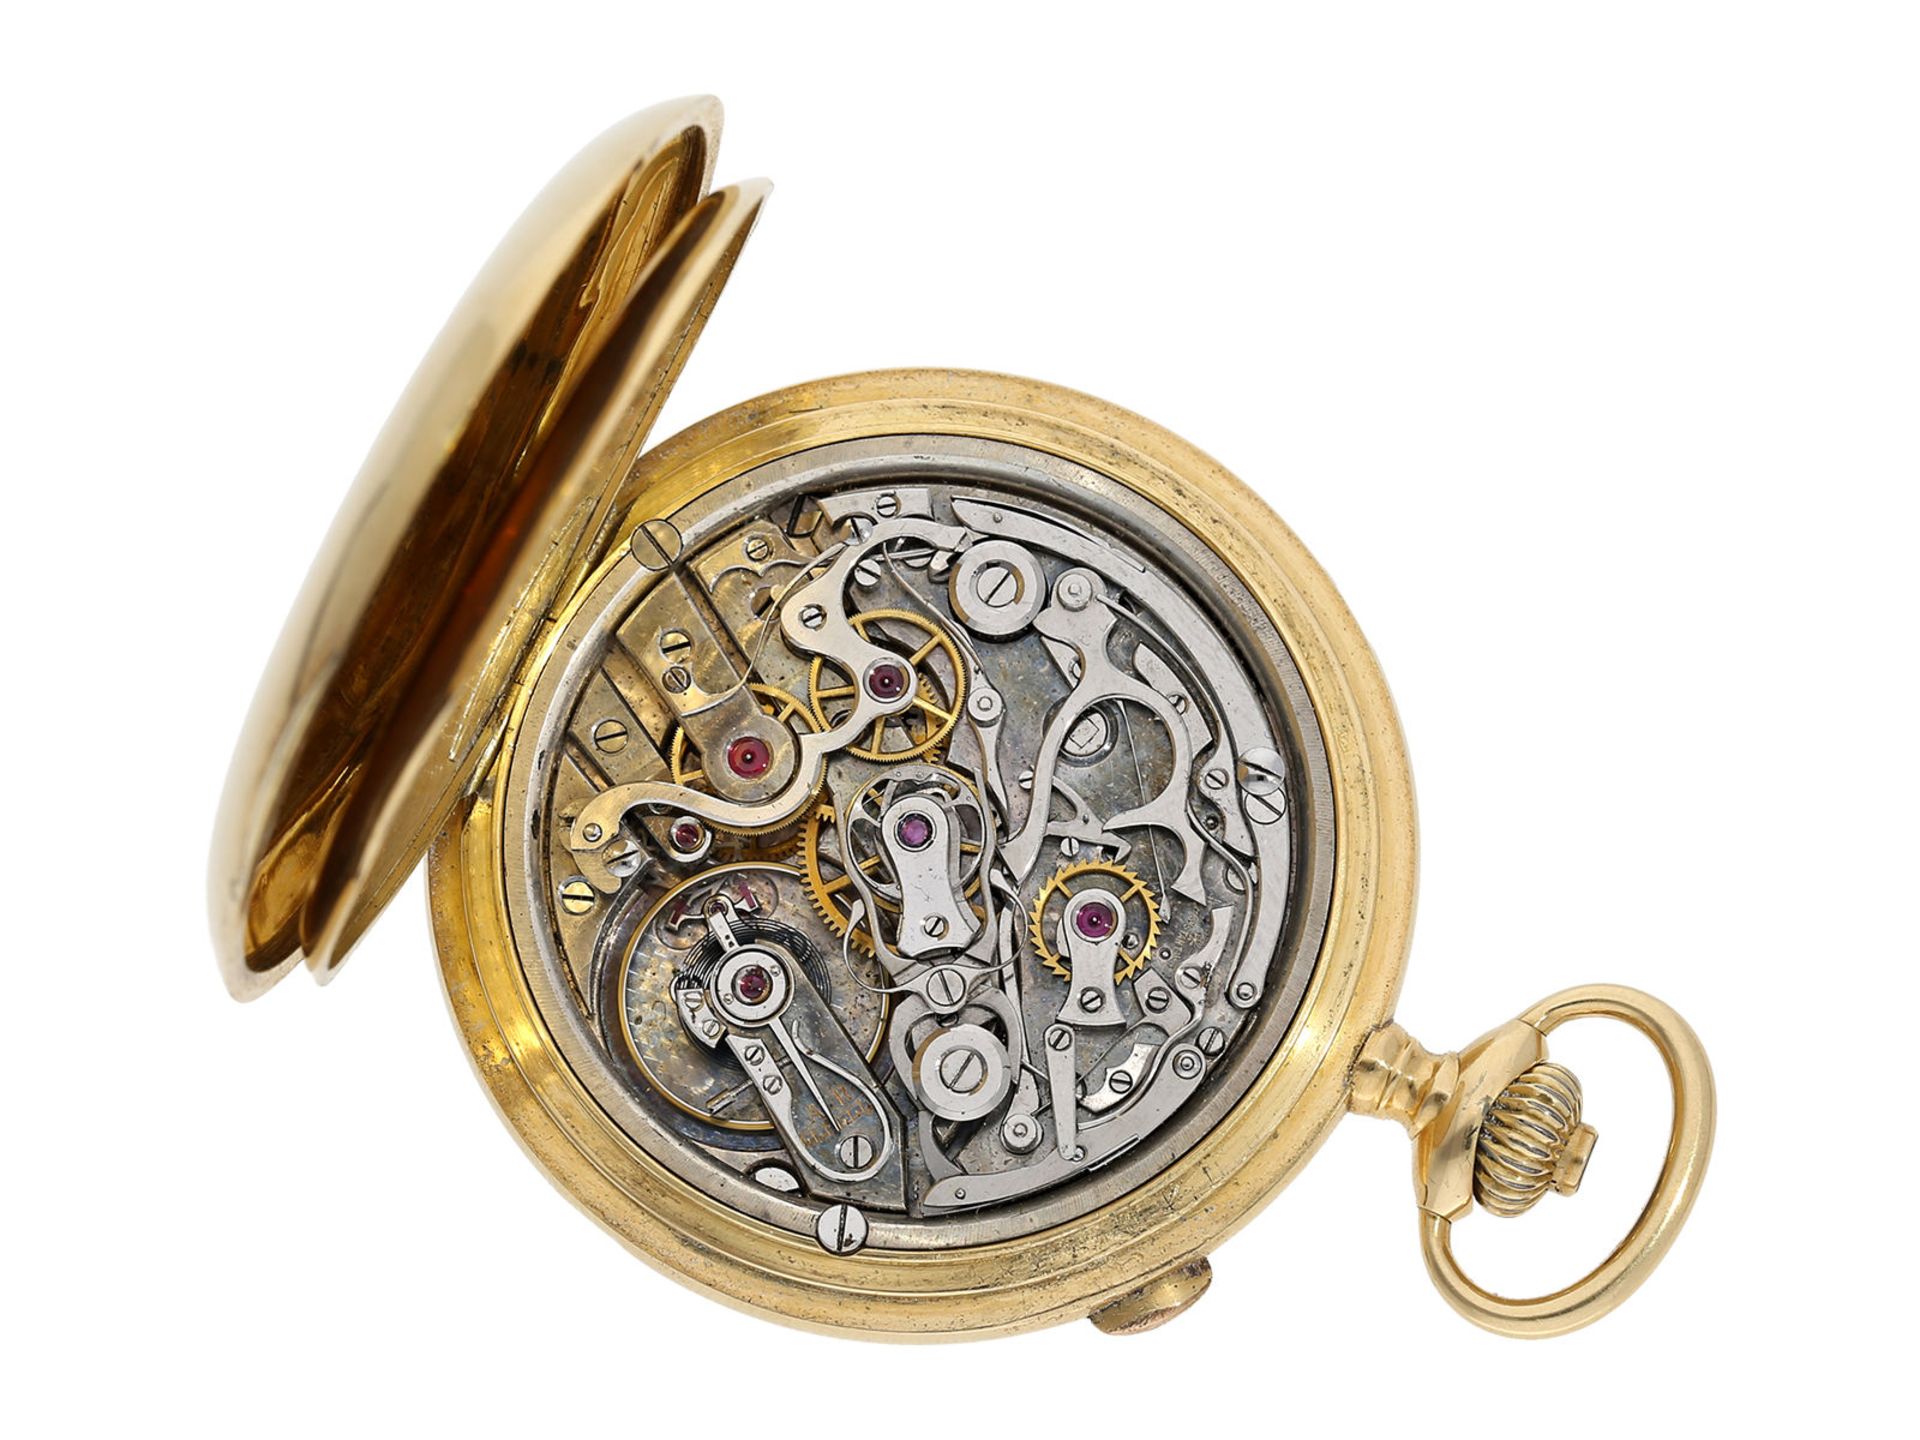 Pocket watch: extremely fine Vacheron & Constantin split-seconds chronograph with register, No. 1154 - Image 3 of 5